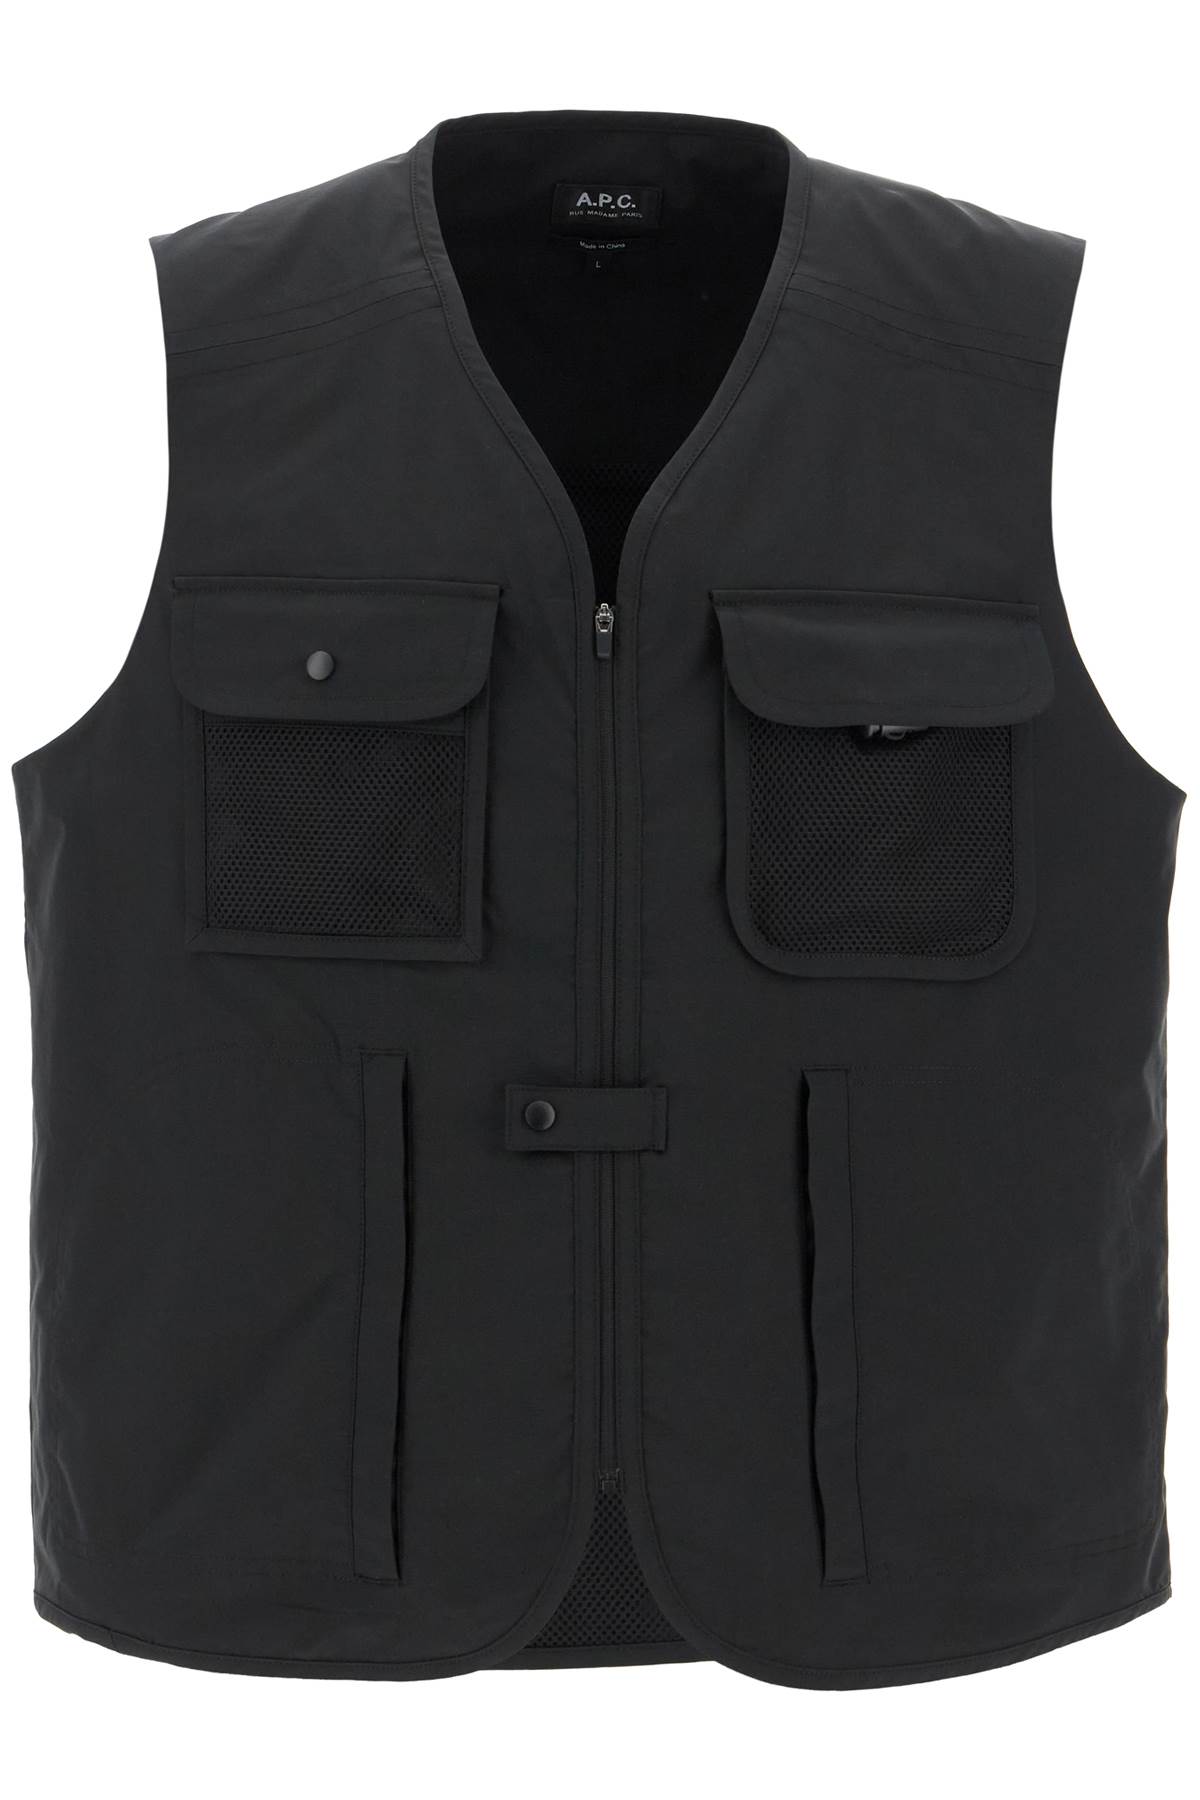 alban Technical Fabric Vest For A. P.C.